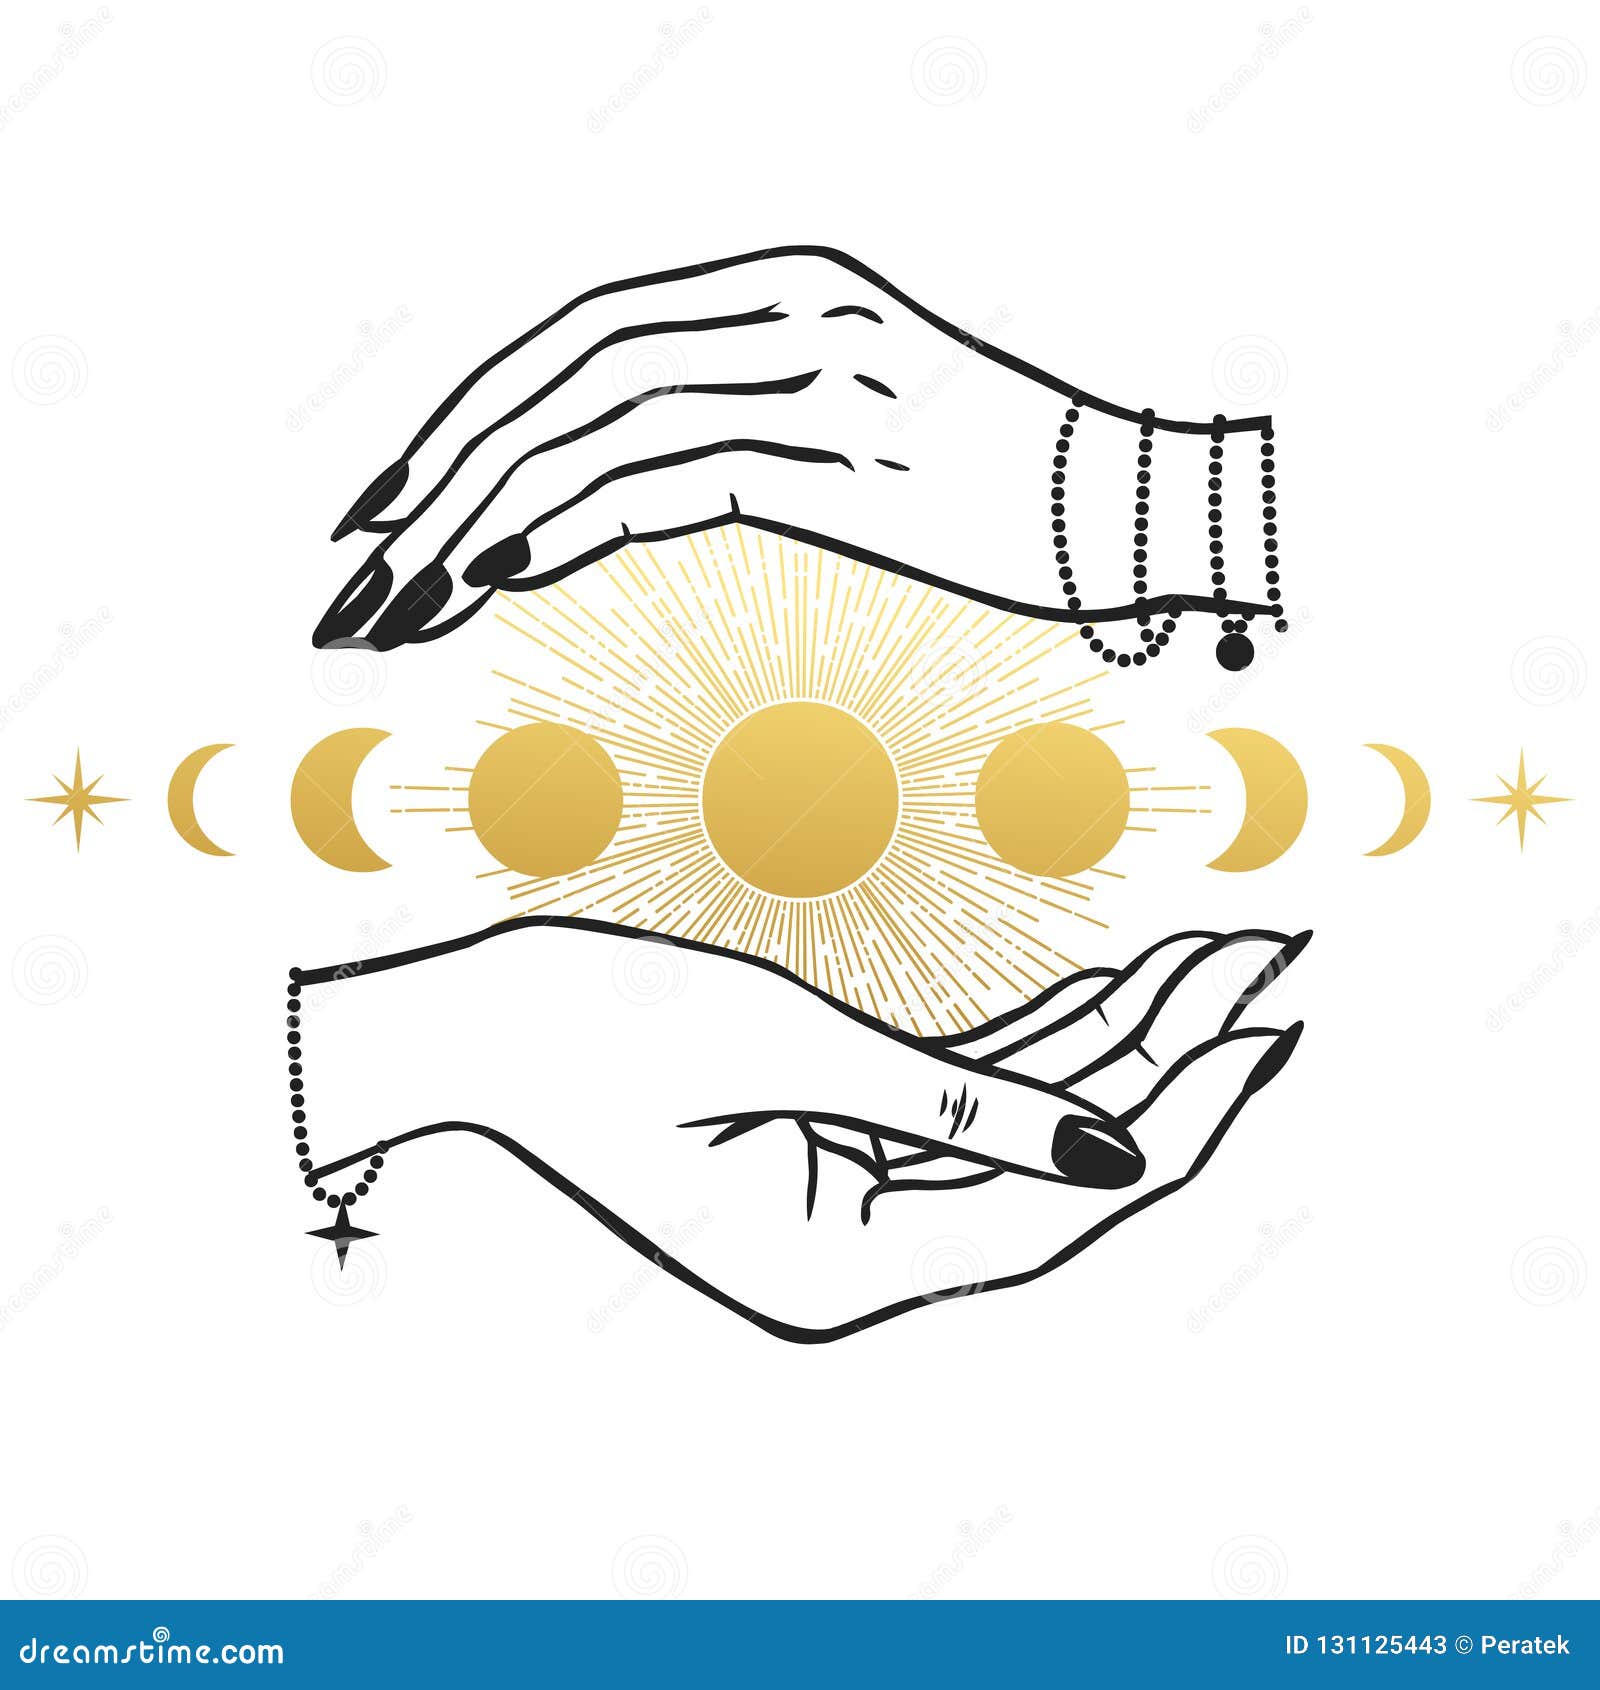 Magic Hand Icon On White Background Royalty Free SVG, Cliparts, Vectors,  and Stock Illustration. Image 96667148.